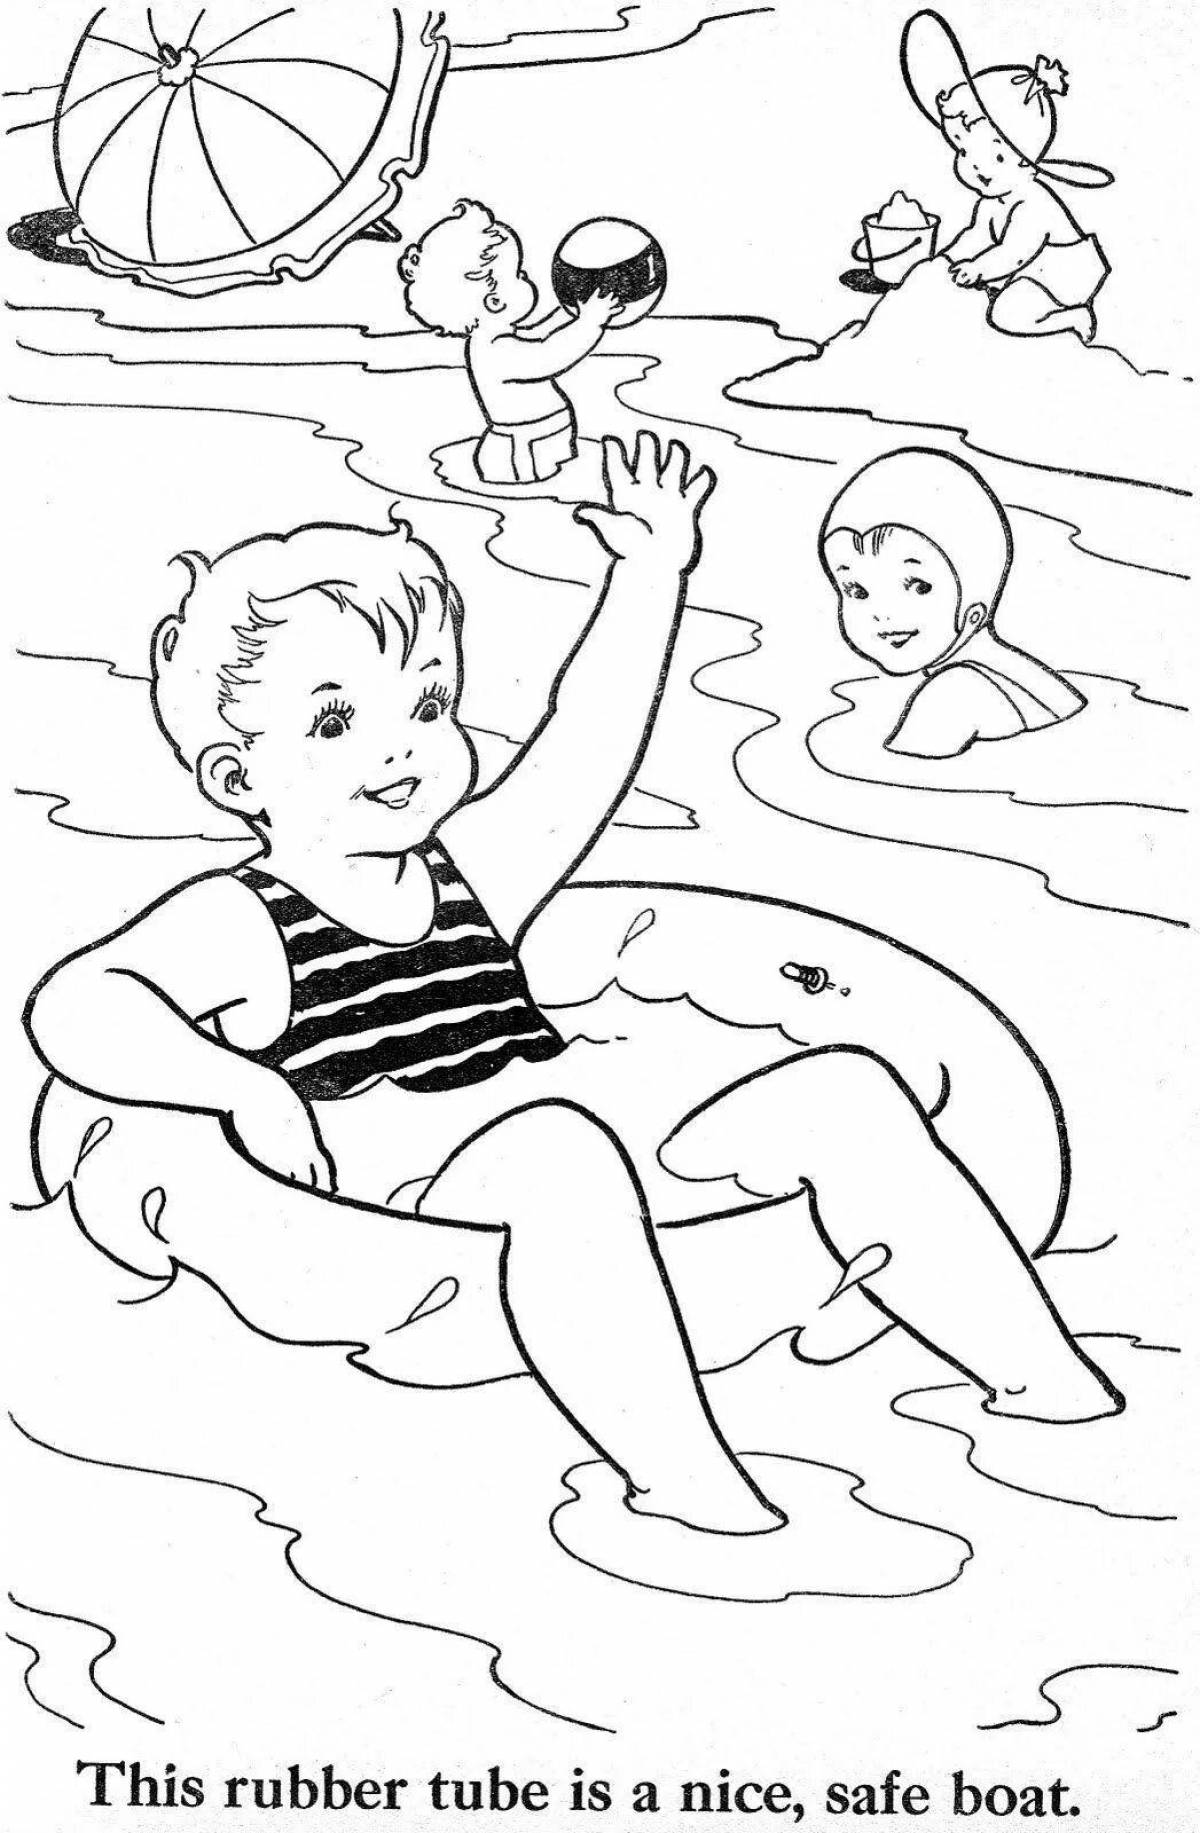 Fun water safety coloring page